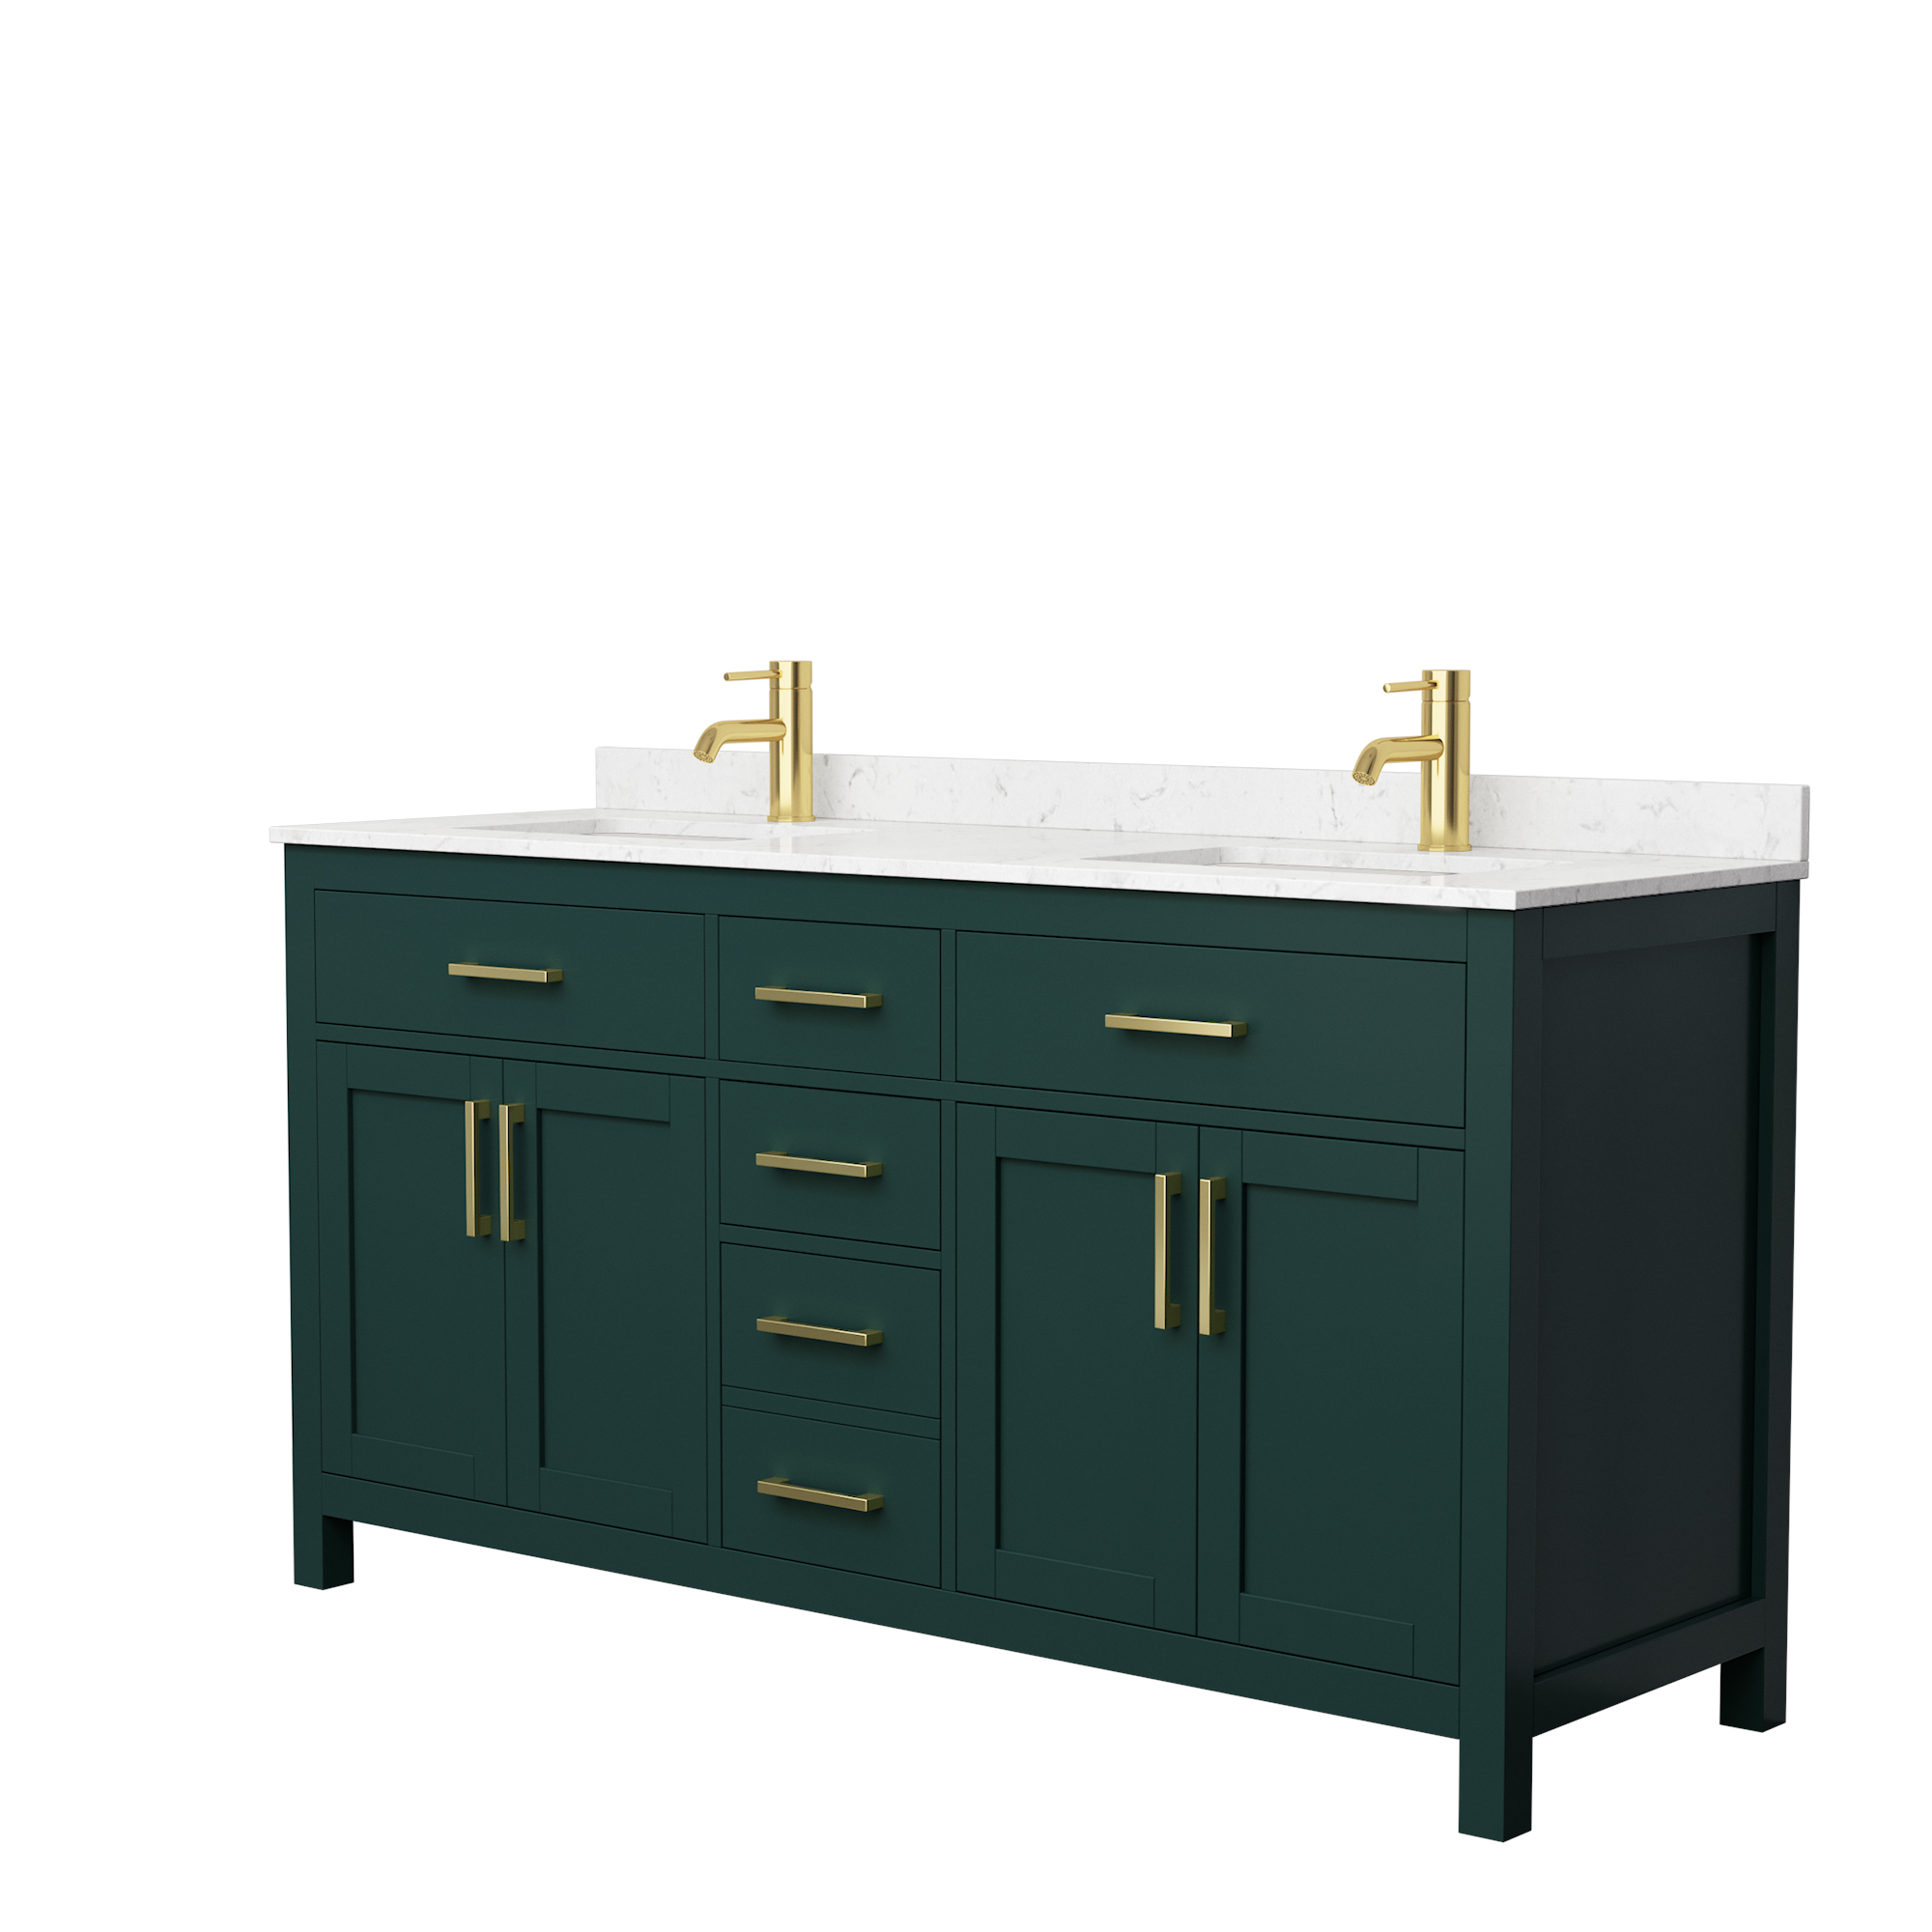 66" Double Bathroom Vanity in Green, Carrara Cultured Marble Countertop, Undermount Square Sinks, Brushed Gold Trim